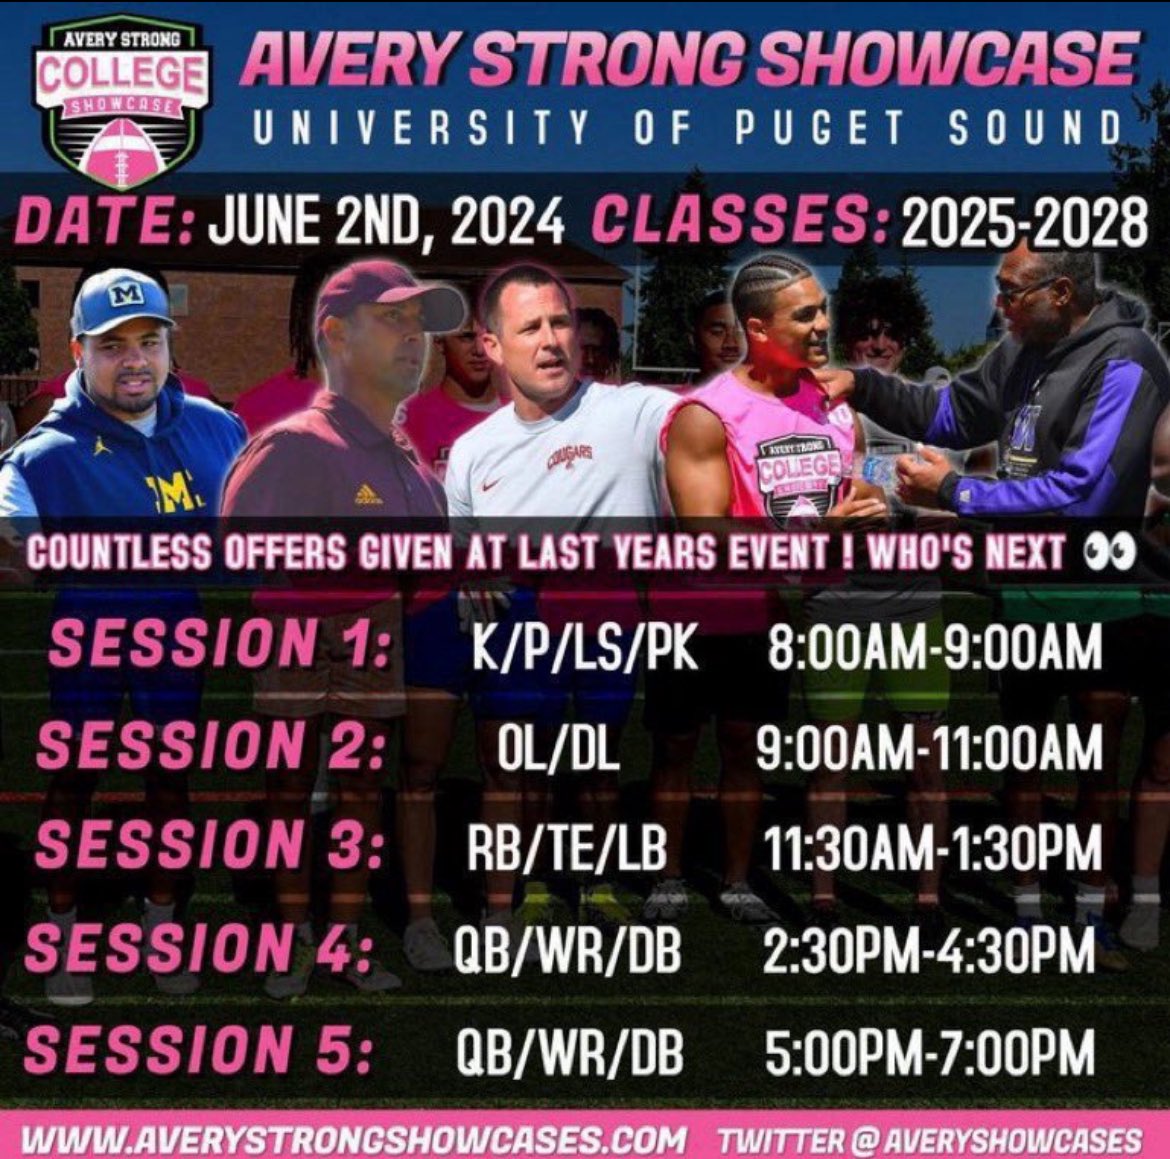 I will be competing @AveryShowcases can’t wait to compete!#AGTG